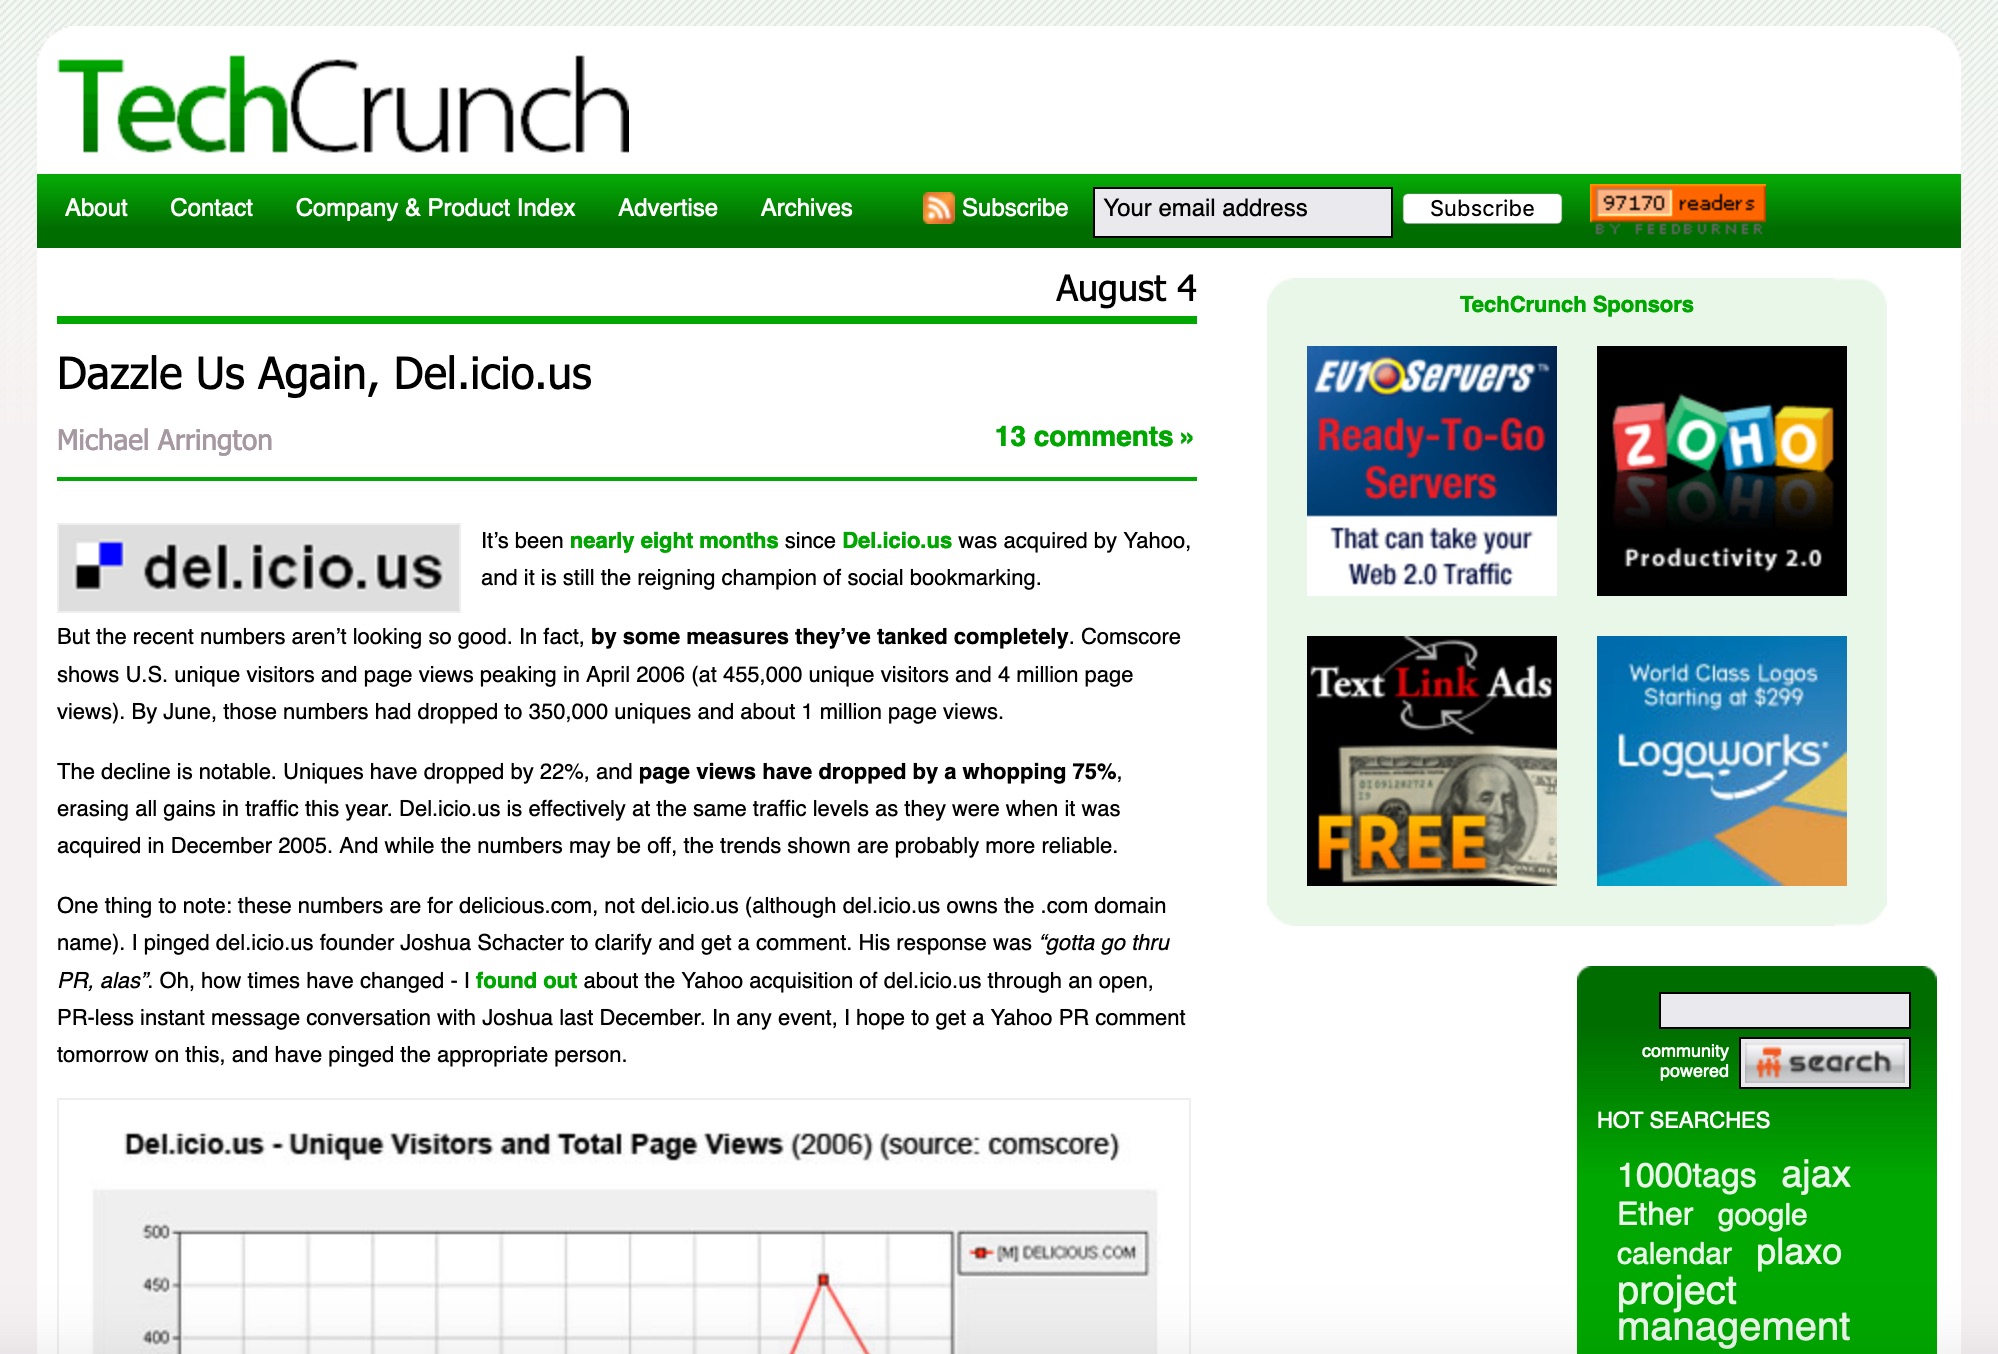 TechCrunch shifts to green color scheme (2006)